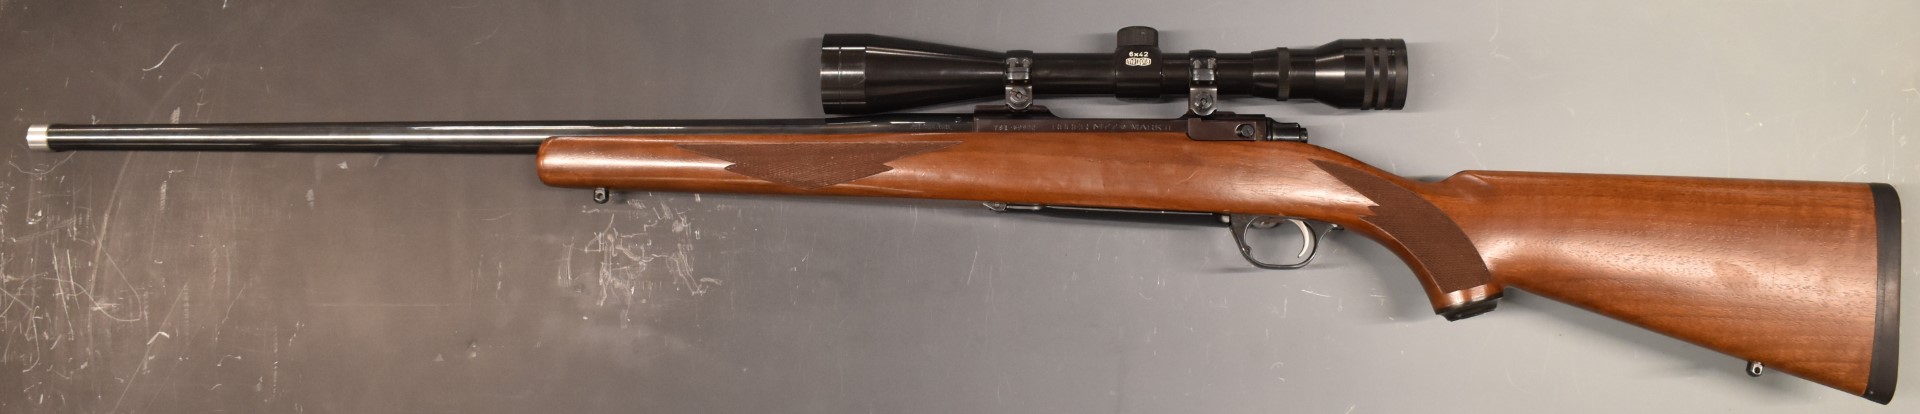 Ruger M77 Mark II .300 Win Mag bolt-action rifle with chequered semi-pistol grip and forend, sling - Image 3 of 3